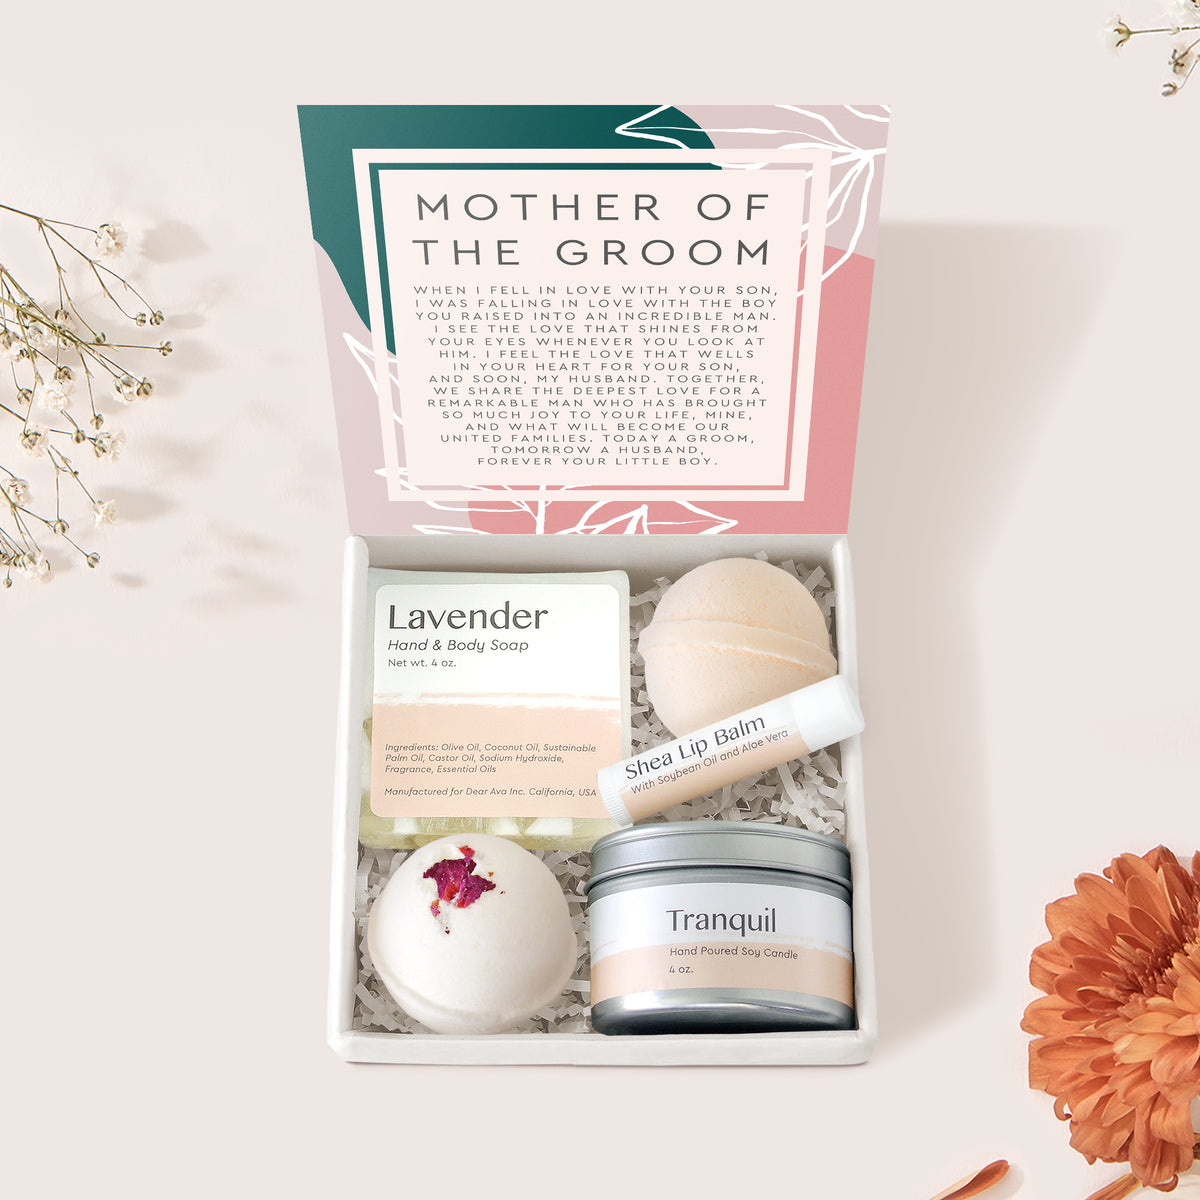 Mother of the Groom Spa Gift Box